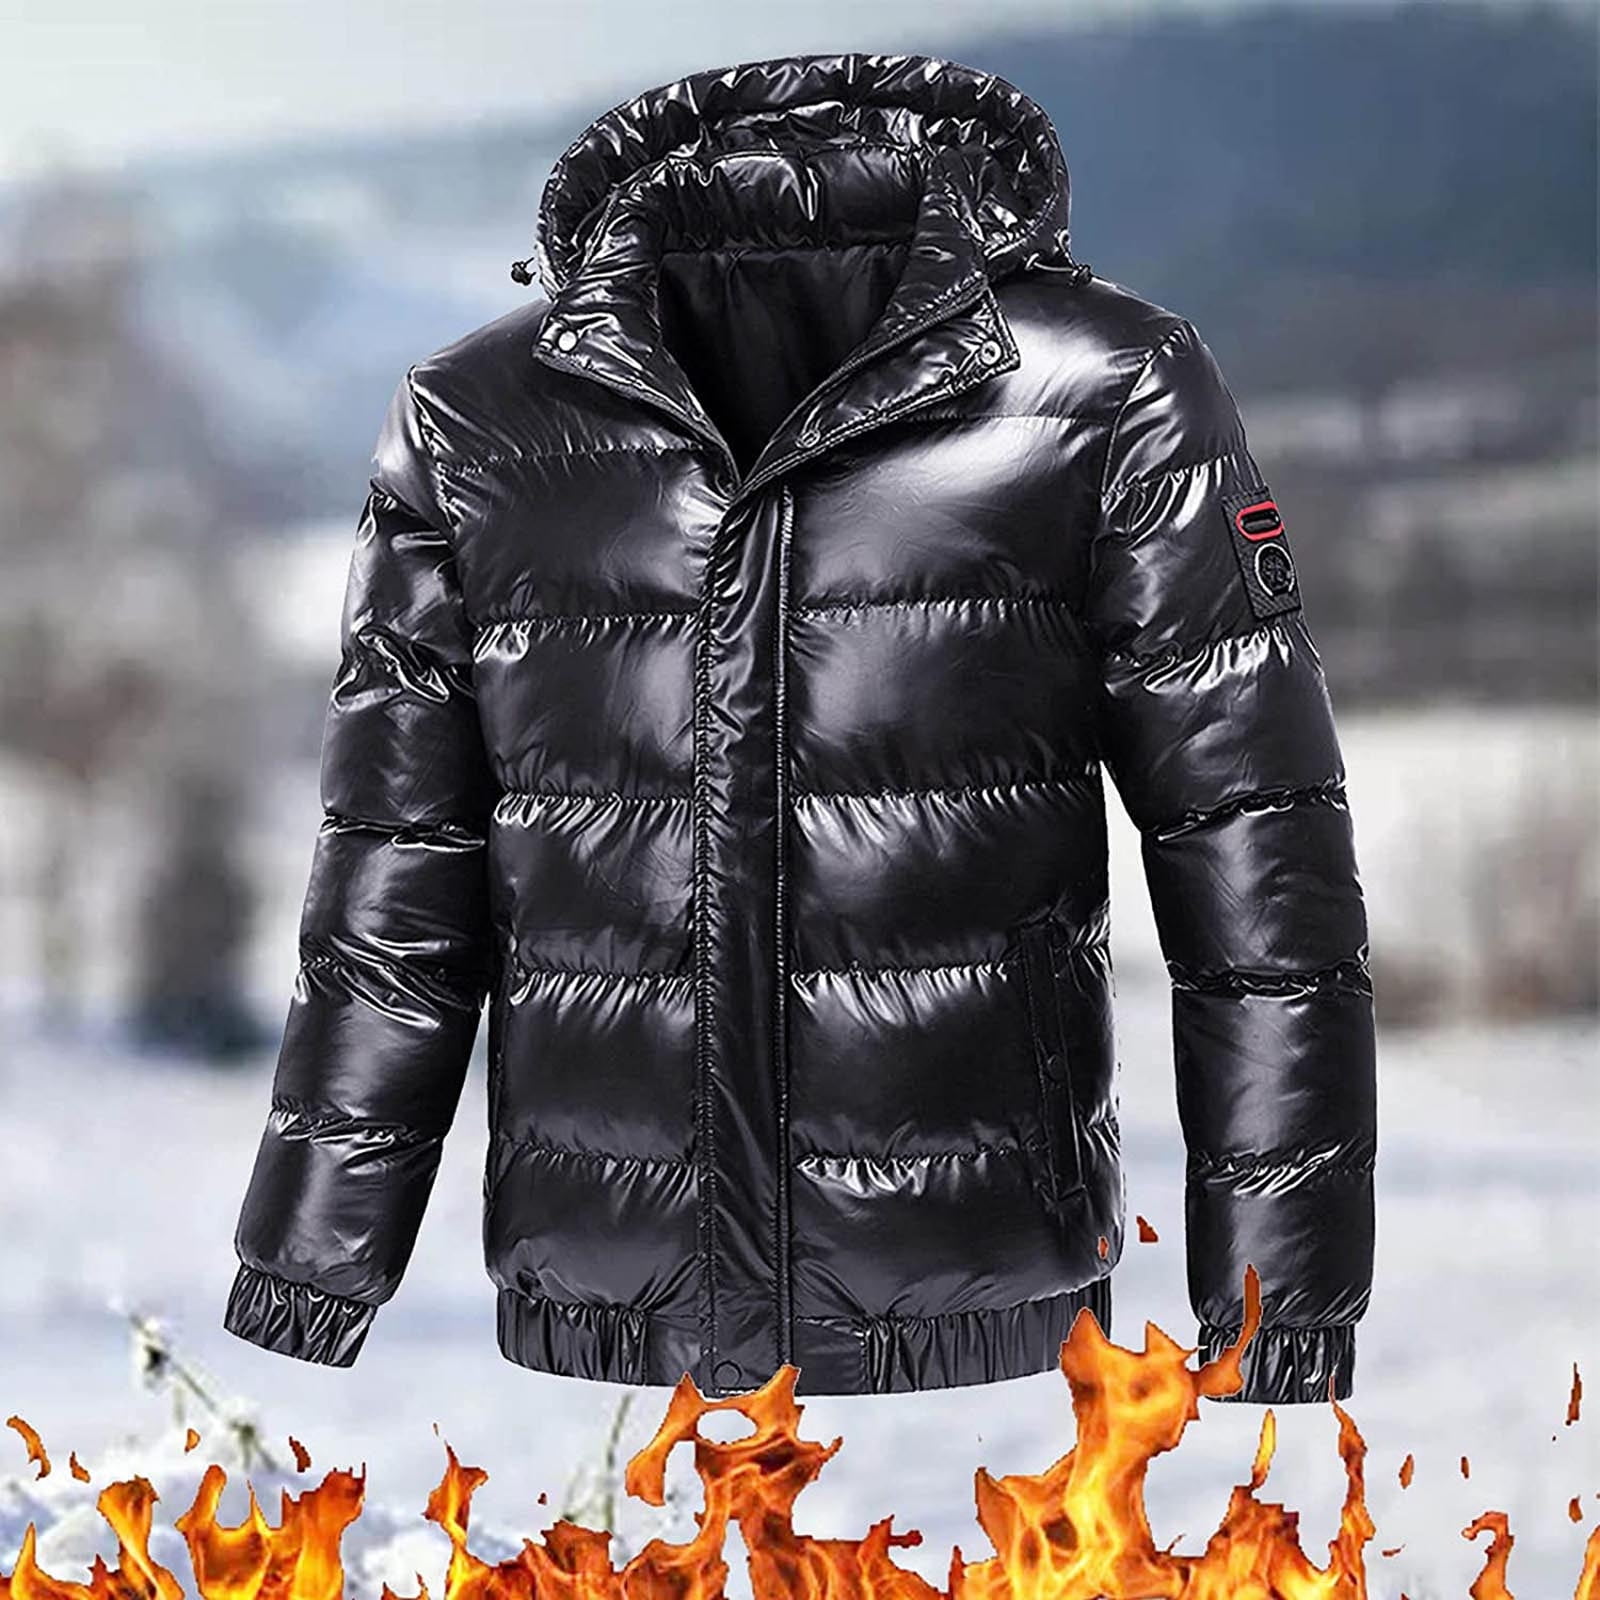 DECILRO Mens Mid-Weight Puffer Jacket with Removable Hood Shiny Hooded Reflective Down Jacket Cotton Jacket Black M, Adult Unisex, Size: Medium